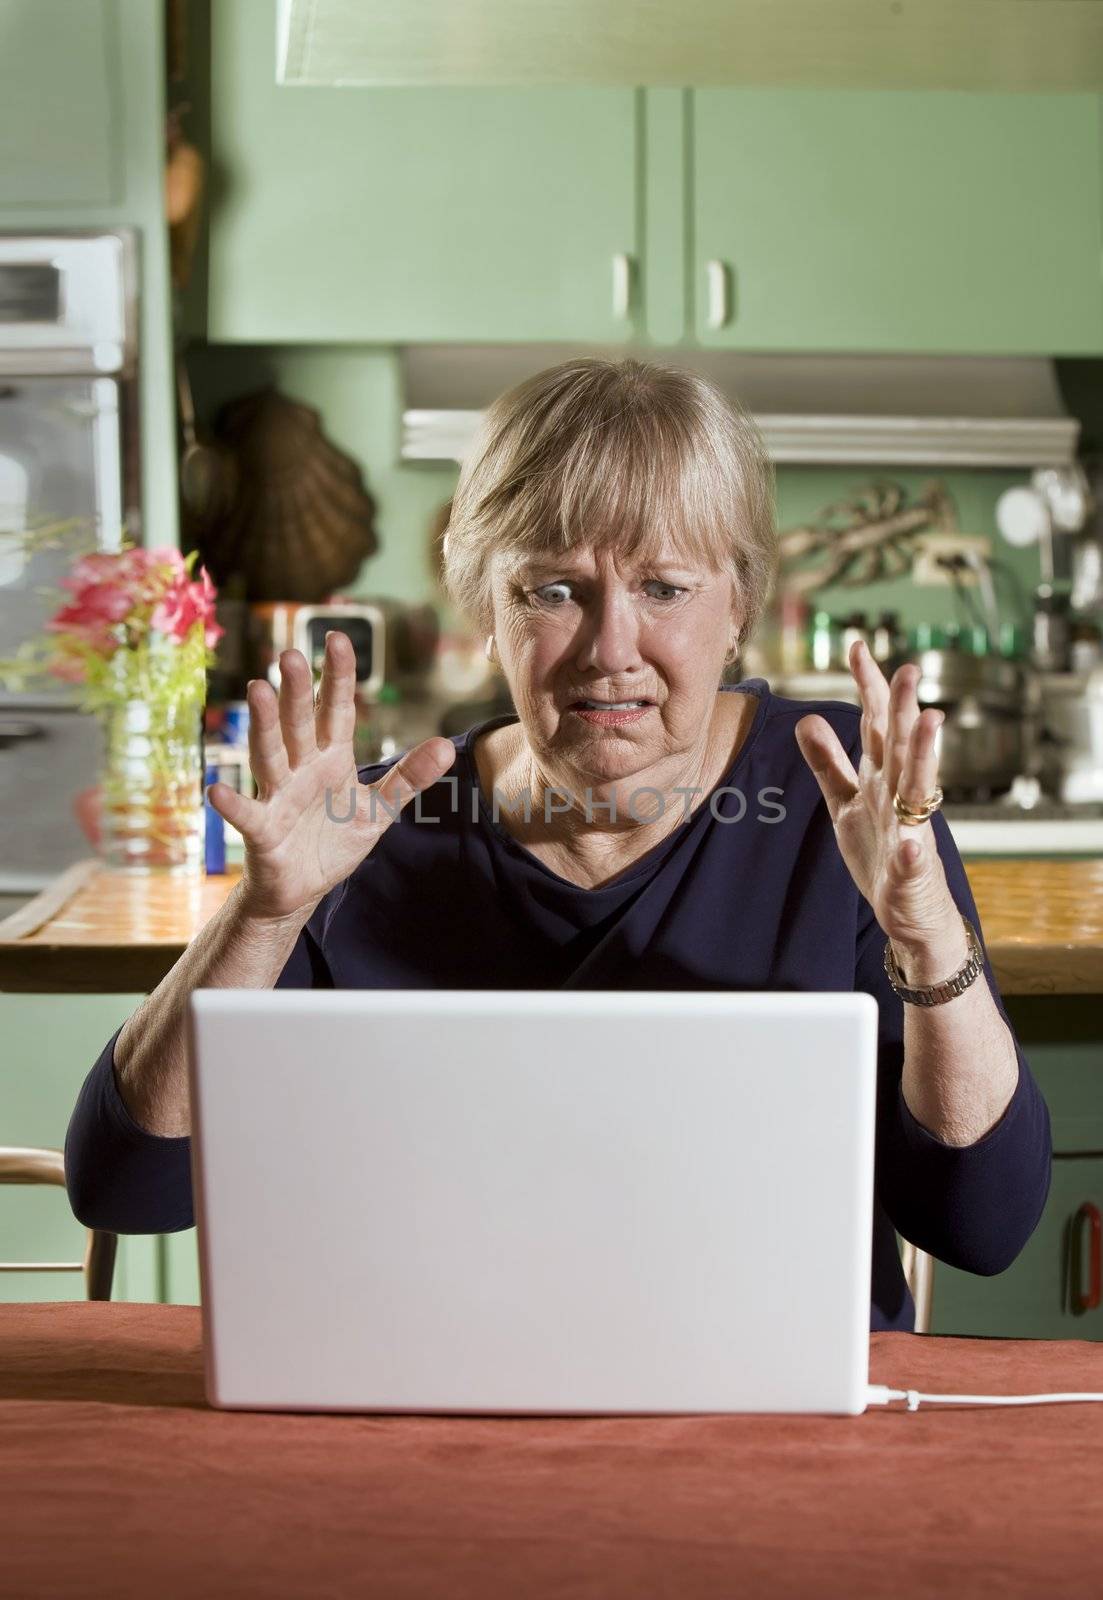 Shocked Senior Woman with a Laptop Computer by Creatista